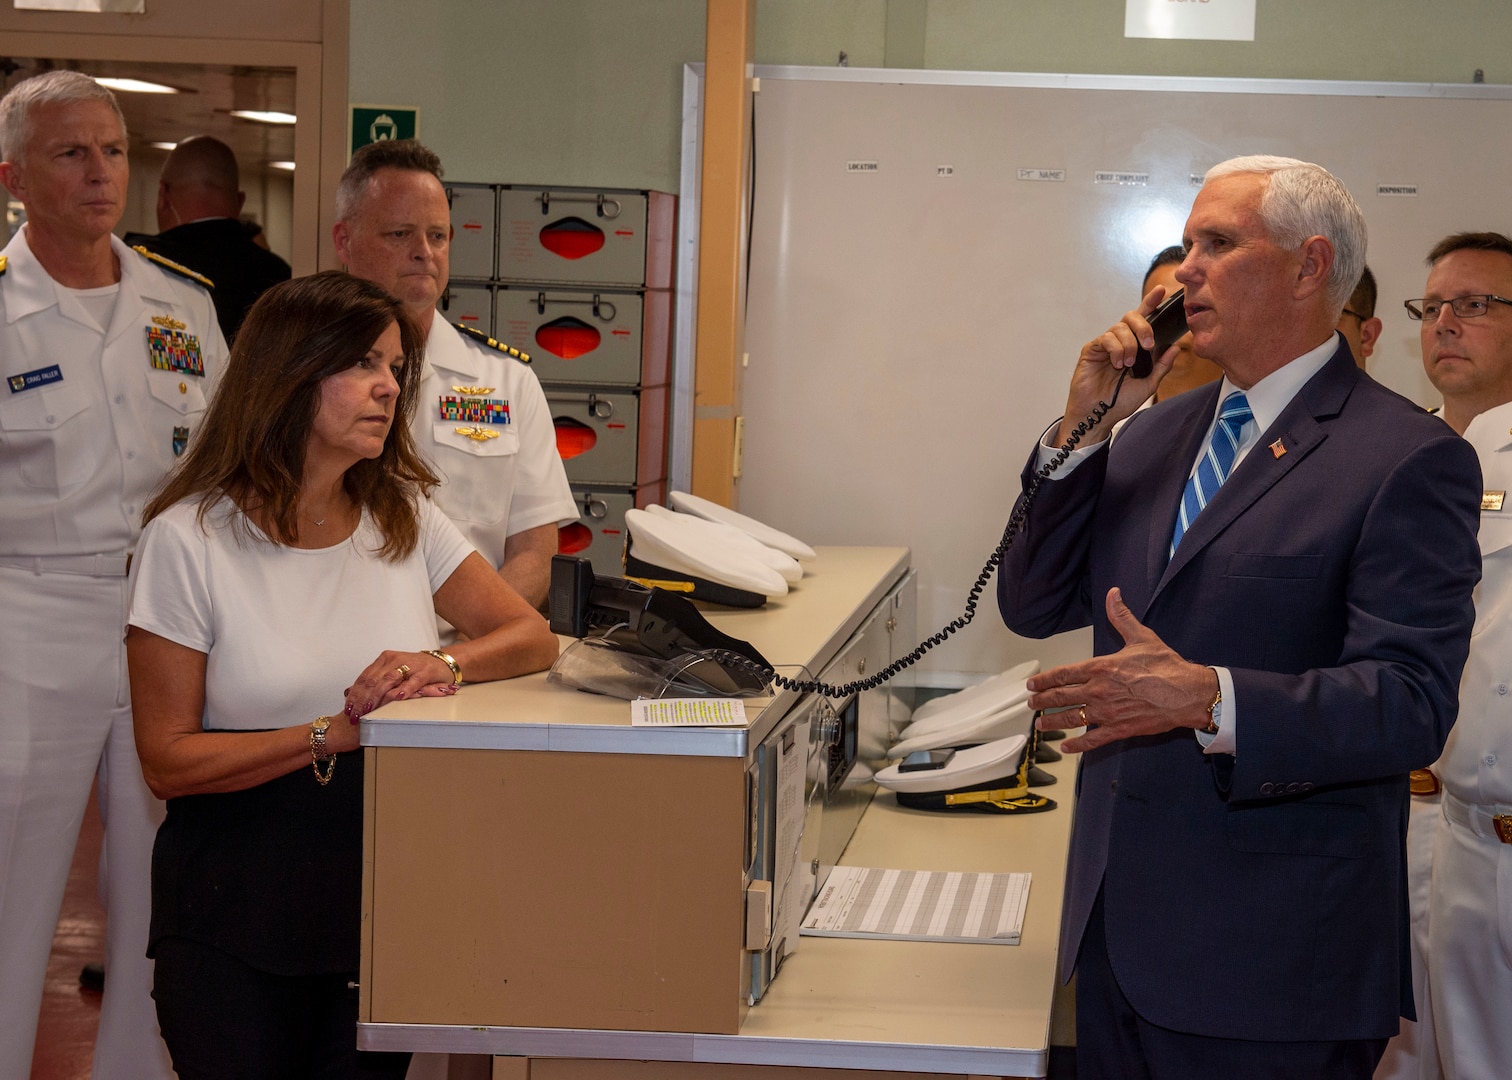 Vice President Mike Pence speaks to the crew over the announcing system aboard hospital ship USNS Comfort (T-AH 20).